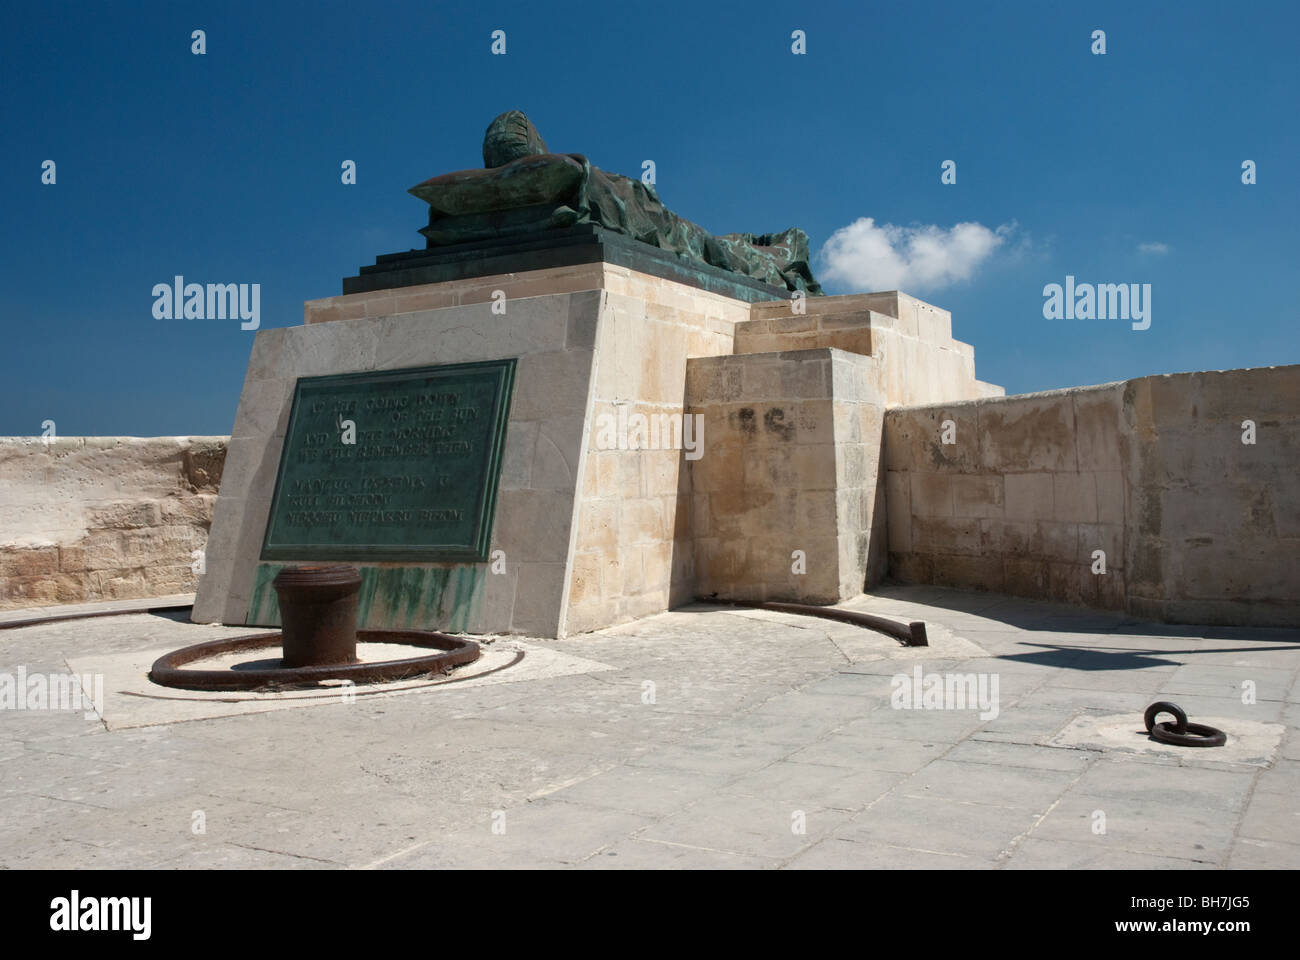 World War II Memorial to those who lost their lives defending Malta. Situated in Valetta, Malta, Europe. Stock Photo